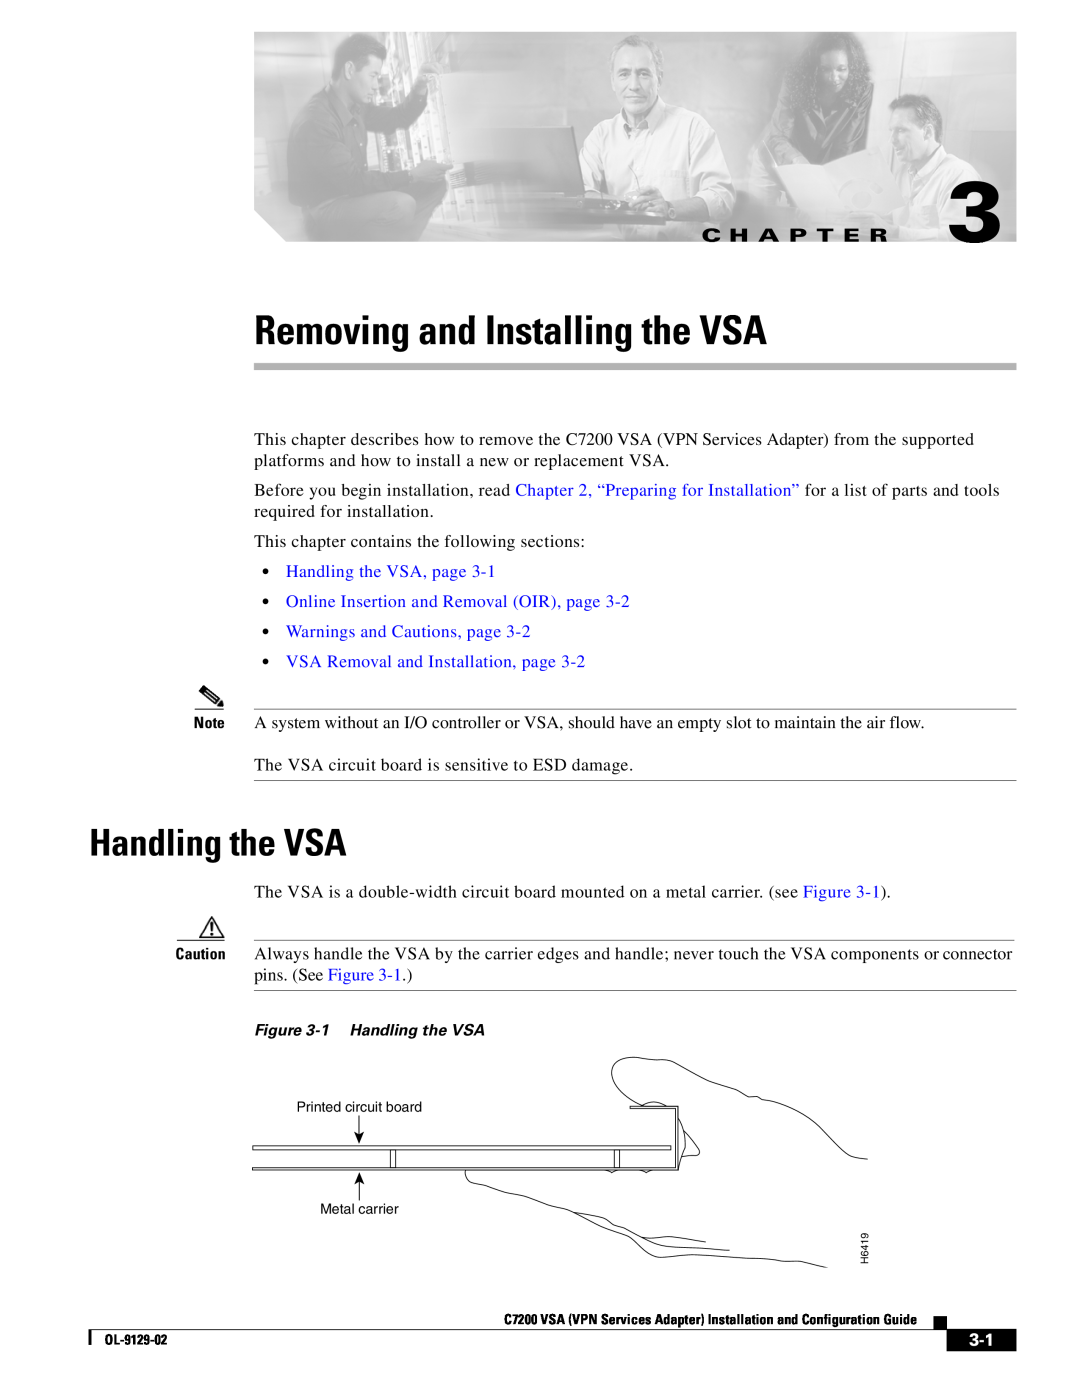 Cisco Systems C7200 manual Removing and Installing the VSA, Handling the VSA, C H A P T E R 